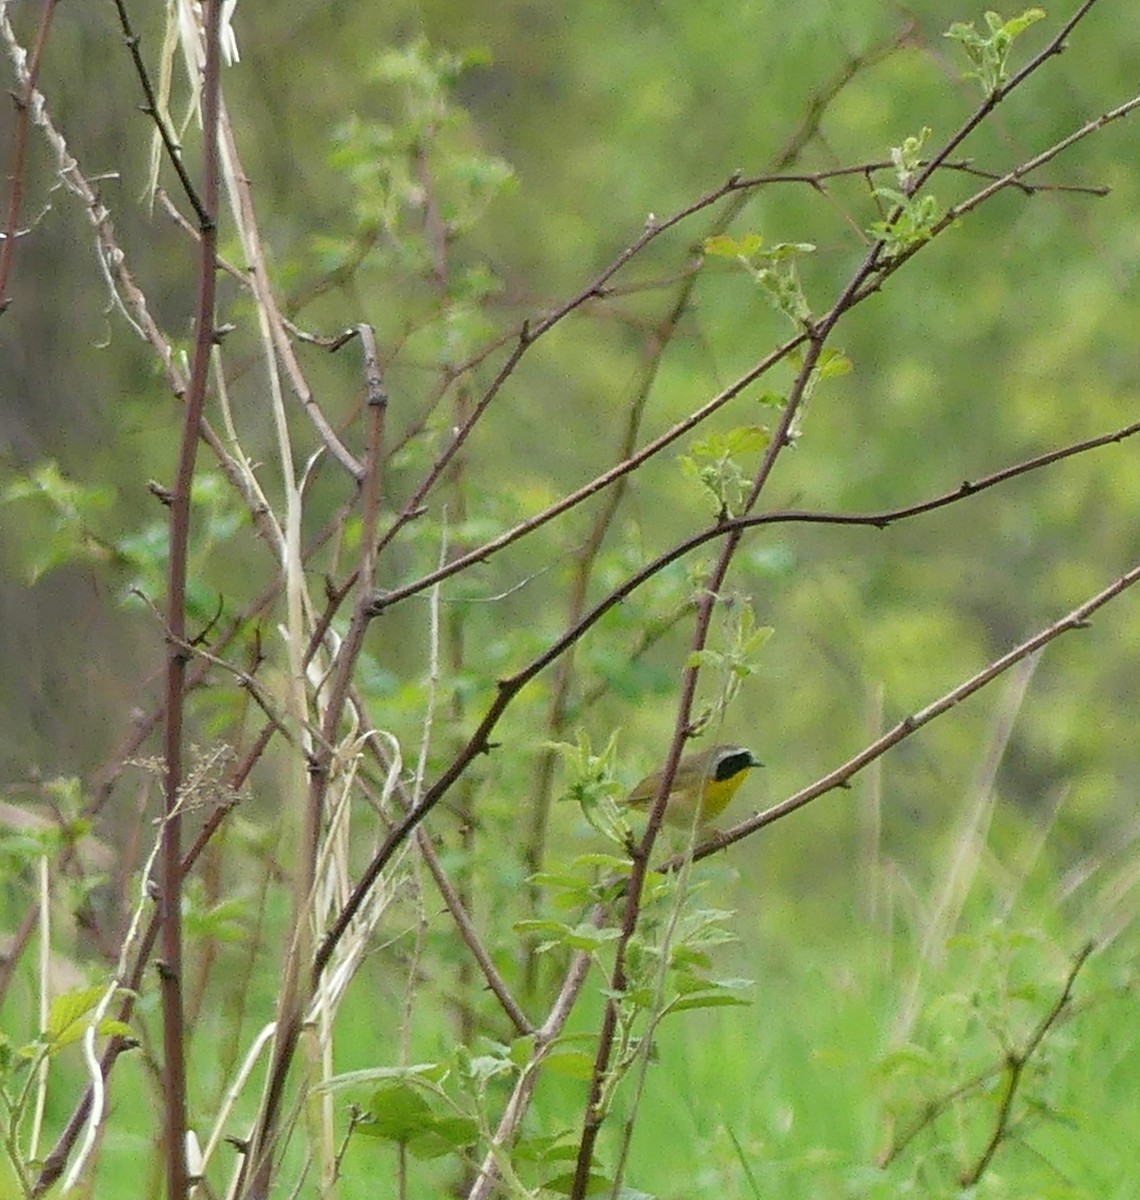 Common Yellowthroat - claudine lafrance cohl